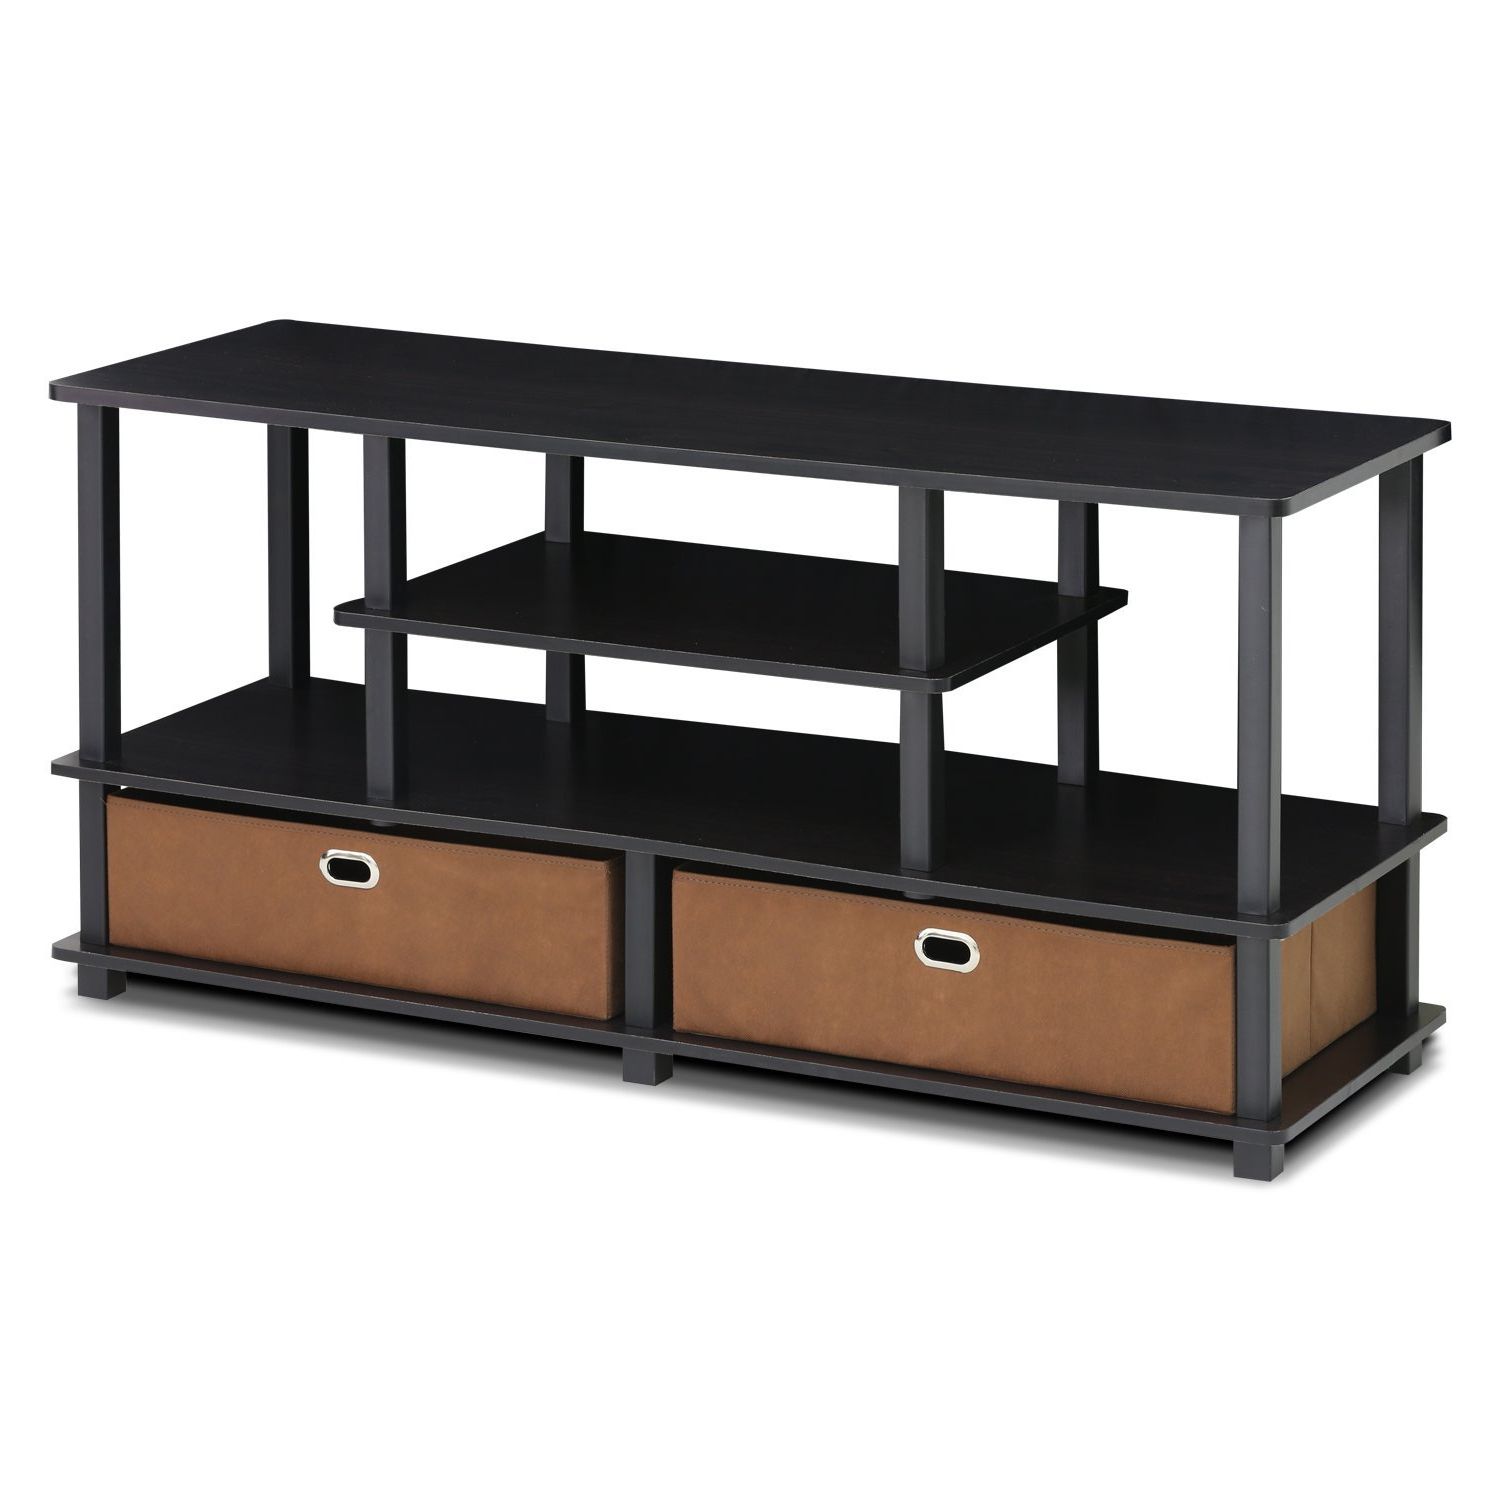 Best And Newest Furinno 15119exbkbr Jaya, Large Tv Stand For Up To 50 Inch With Furinno Jaya Large Entertainment Center Tv Stands (View 9 of 10)